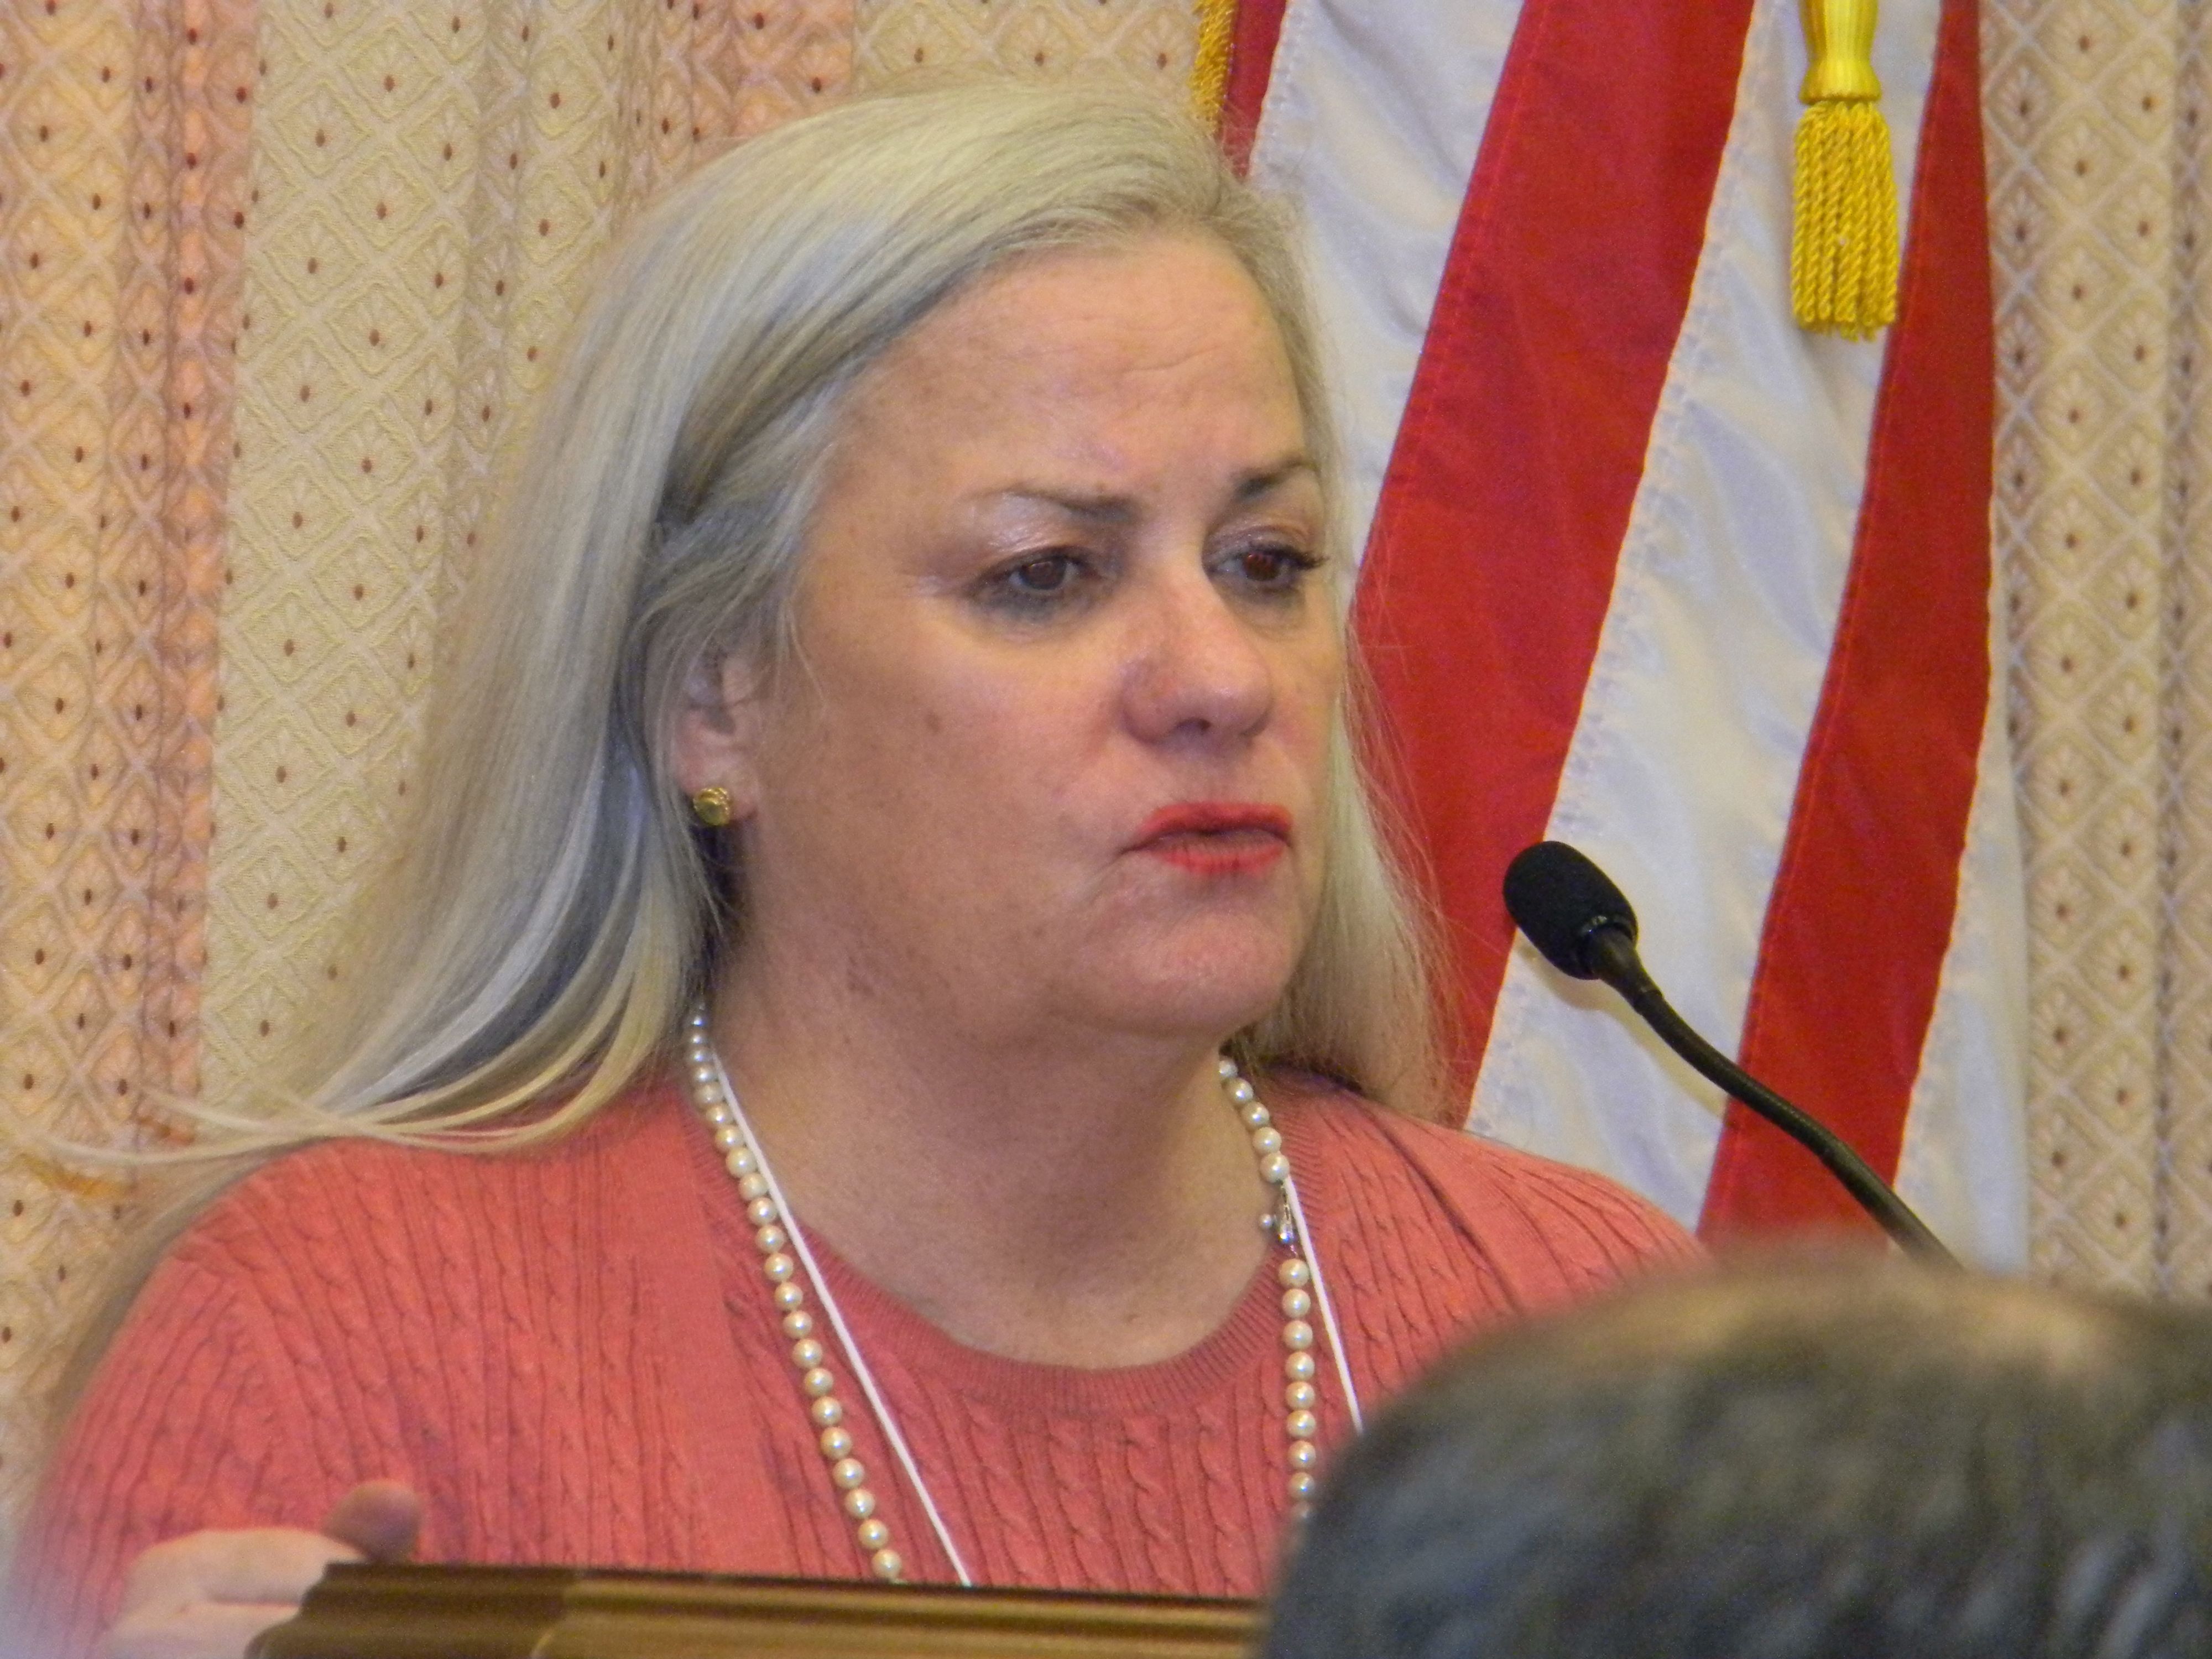 Moira Shea speaking at the Usher syndrome congressional briefing